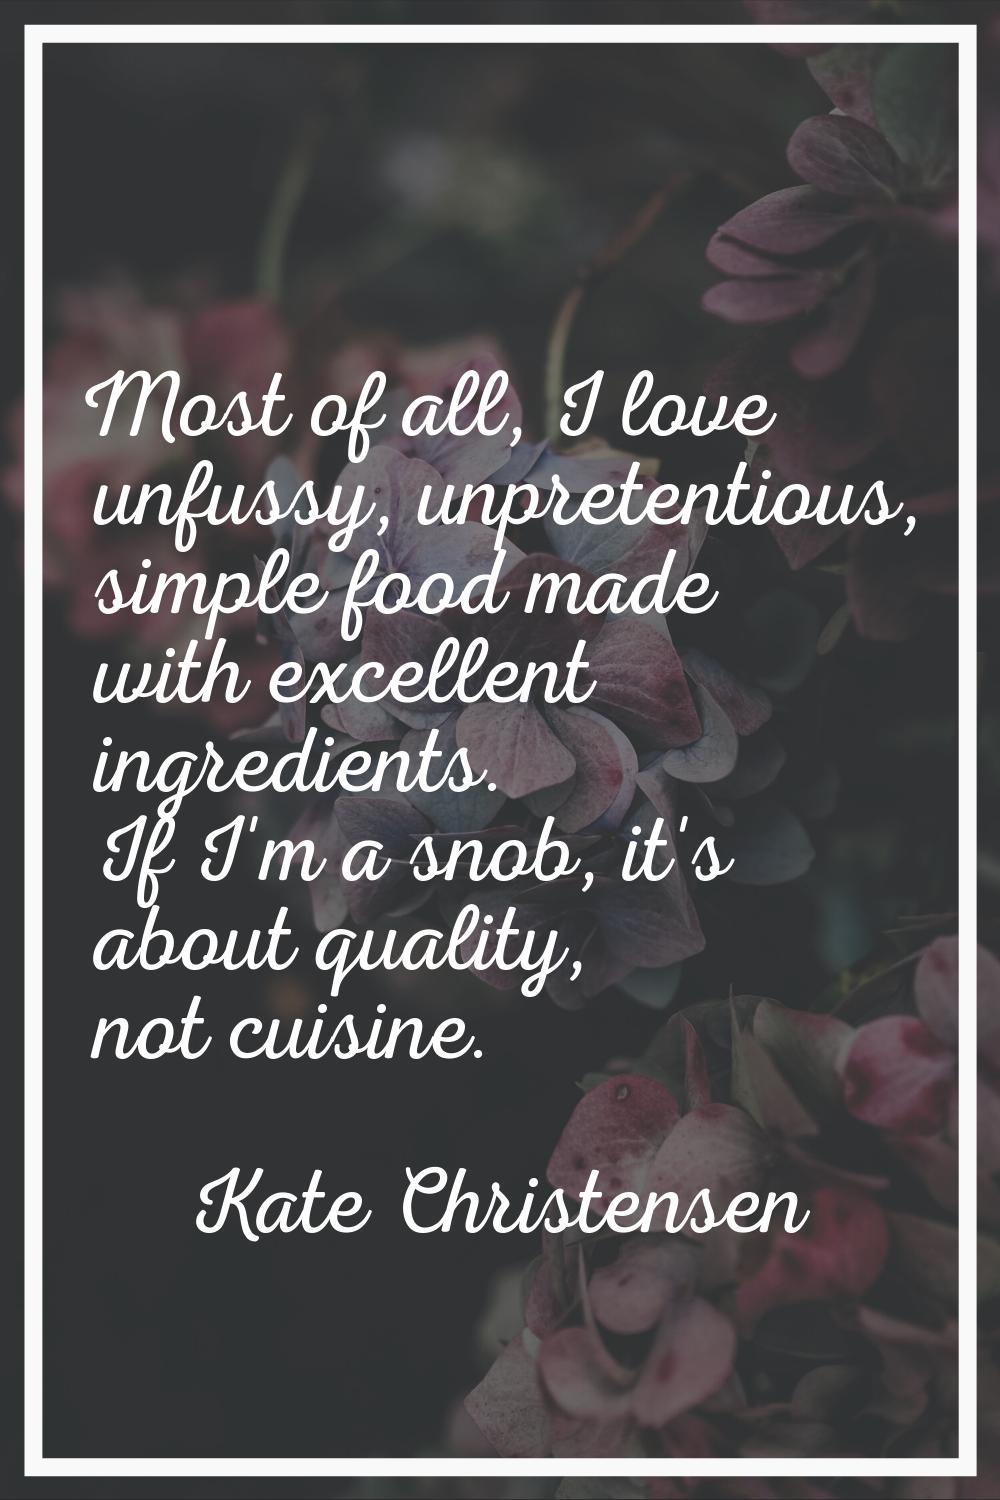 Most of all, I love unfussy, unpretentious, simple food made with excellent ingredients. If I'm a s